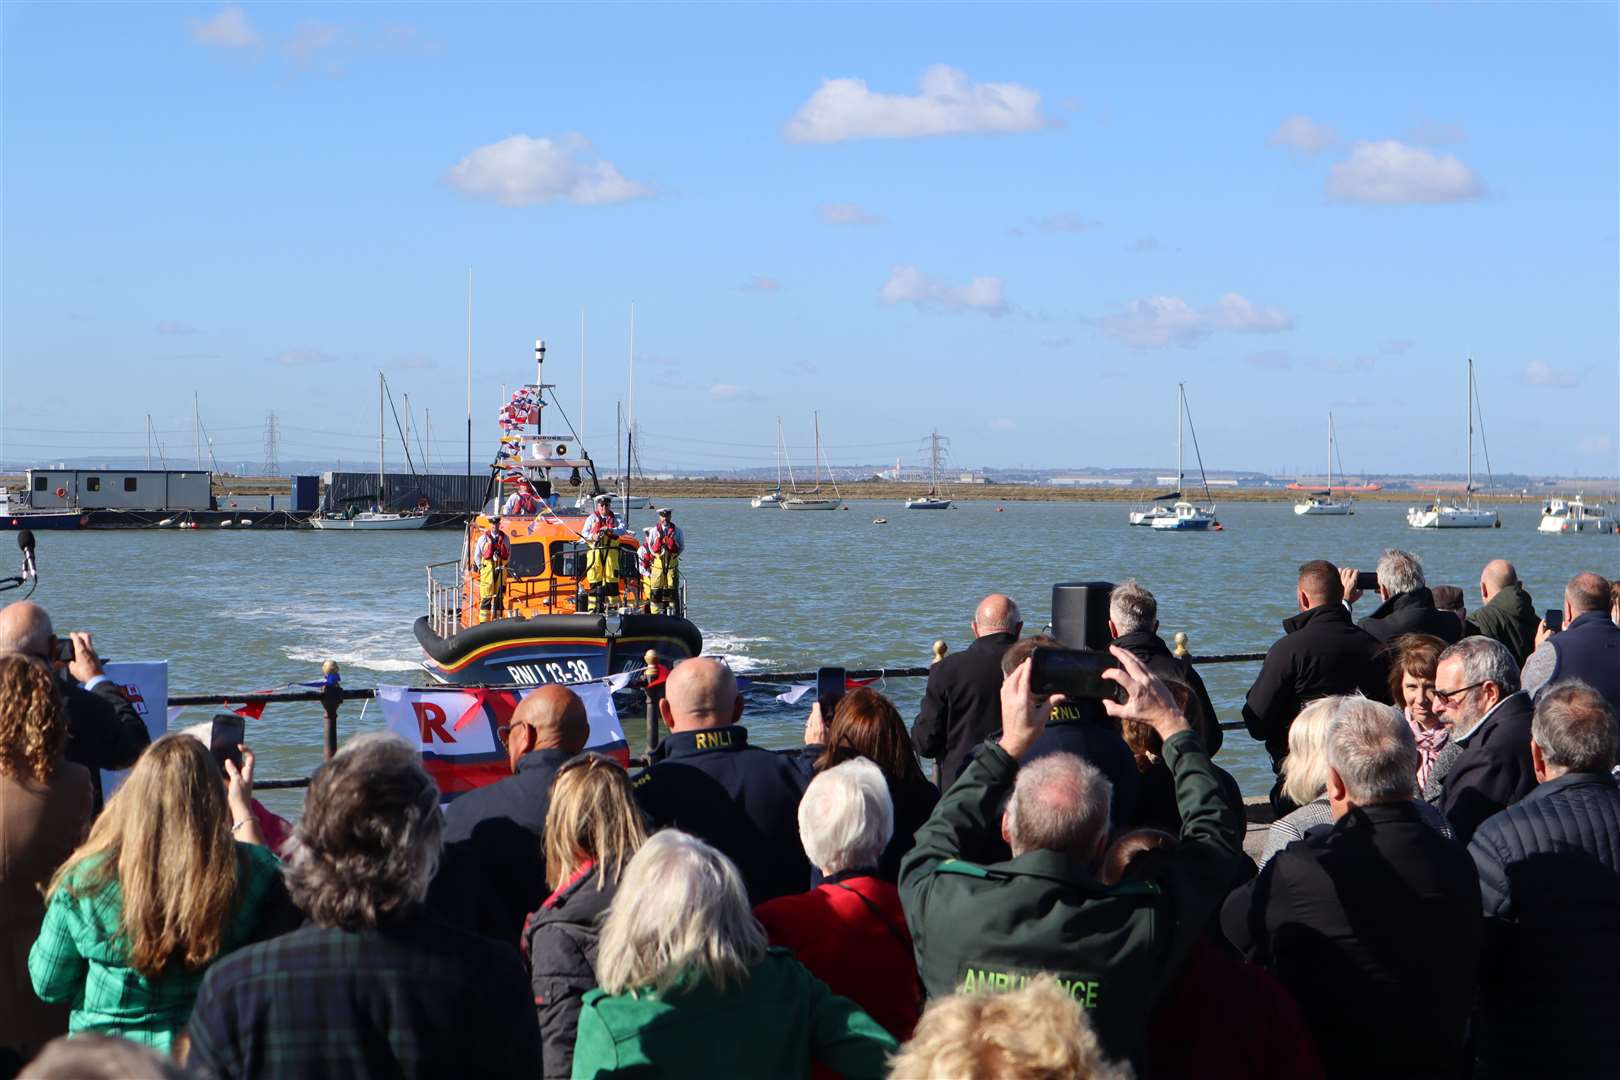 The crowd watches as Sheppey's new RNLI lifeboat the Judith Copping Joyce arrives at Crundall's Wharf, Queenborough, on Saturday